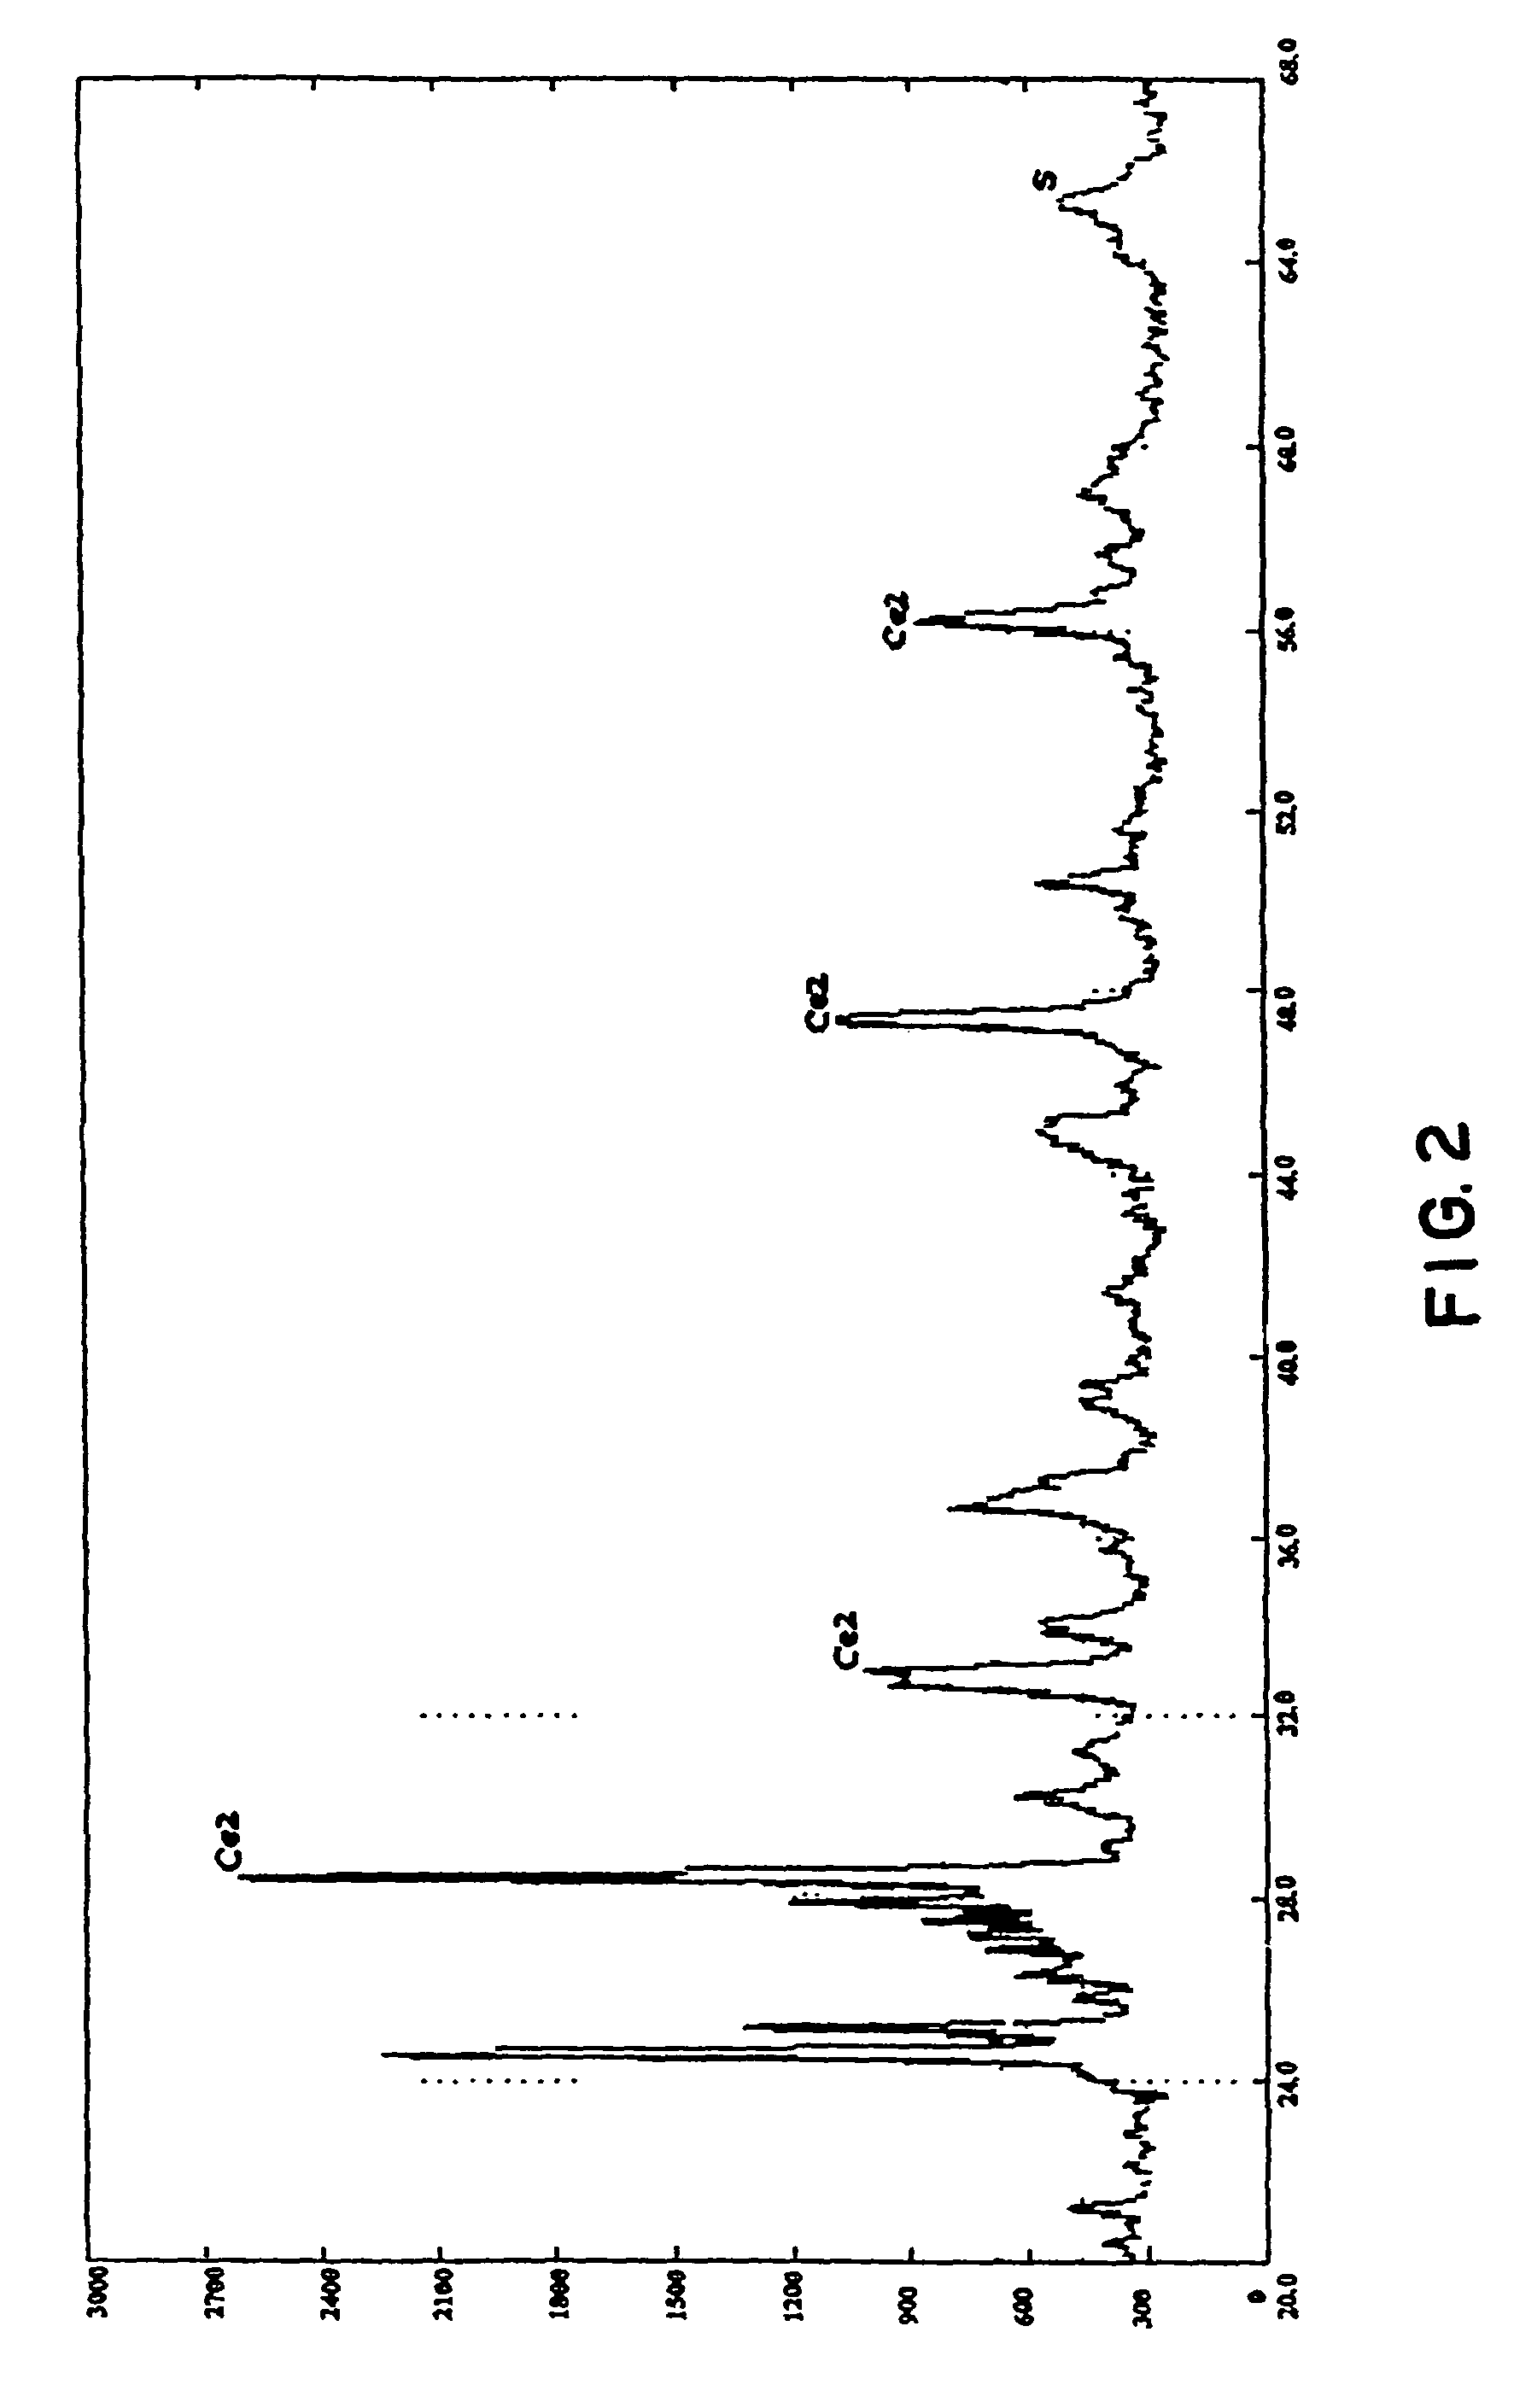 Trifunctional catalyst for sulphur transfer, denitrogenation and combustion promoting and a method for preparing the same